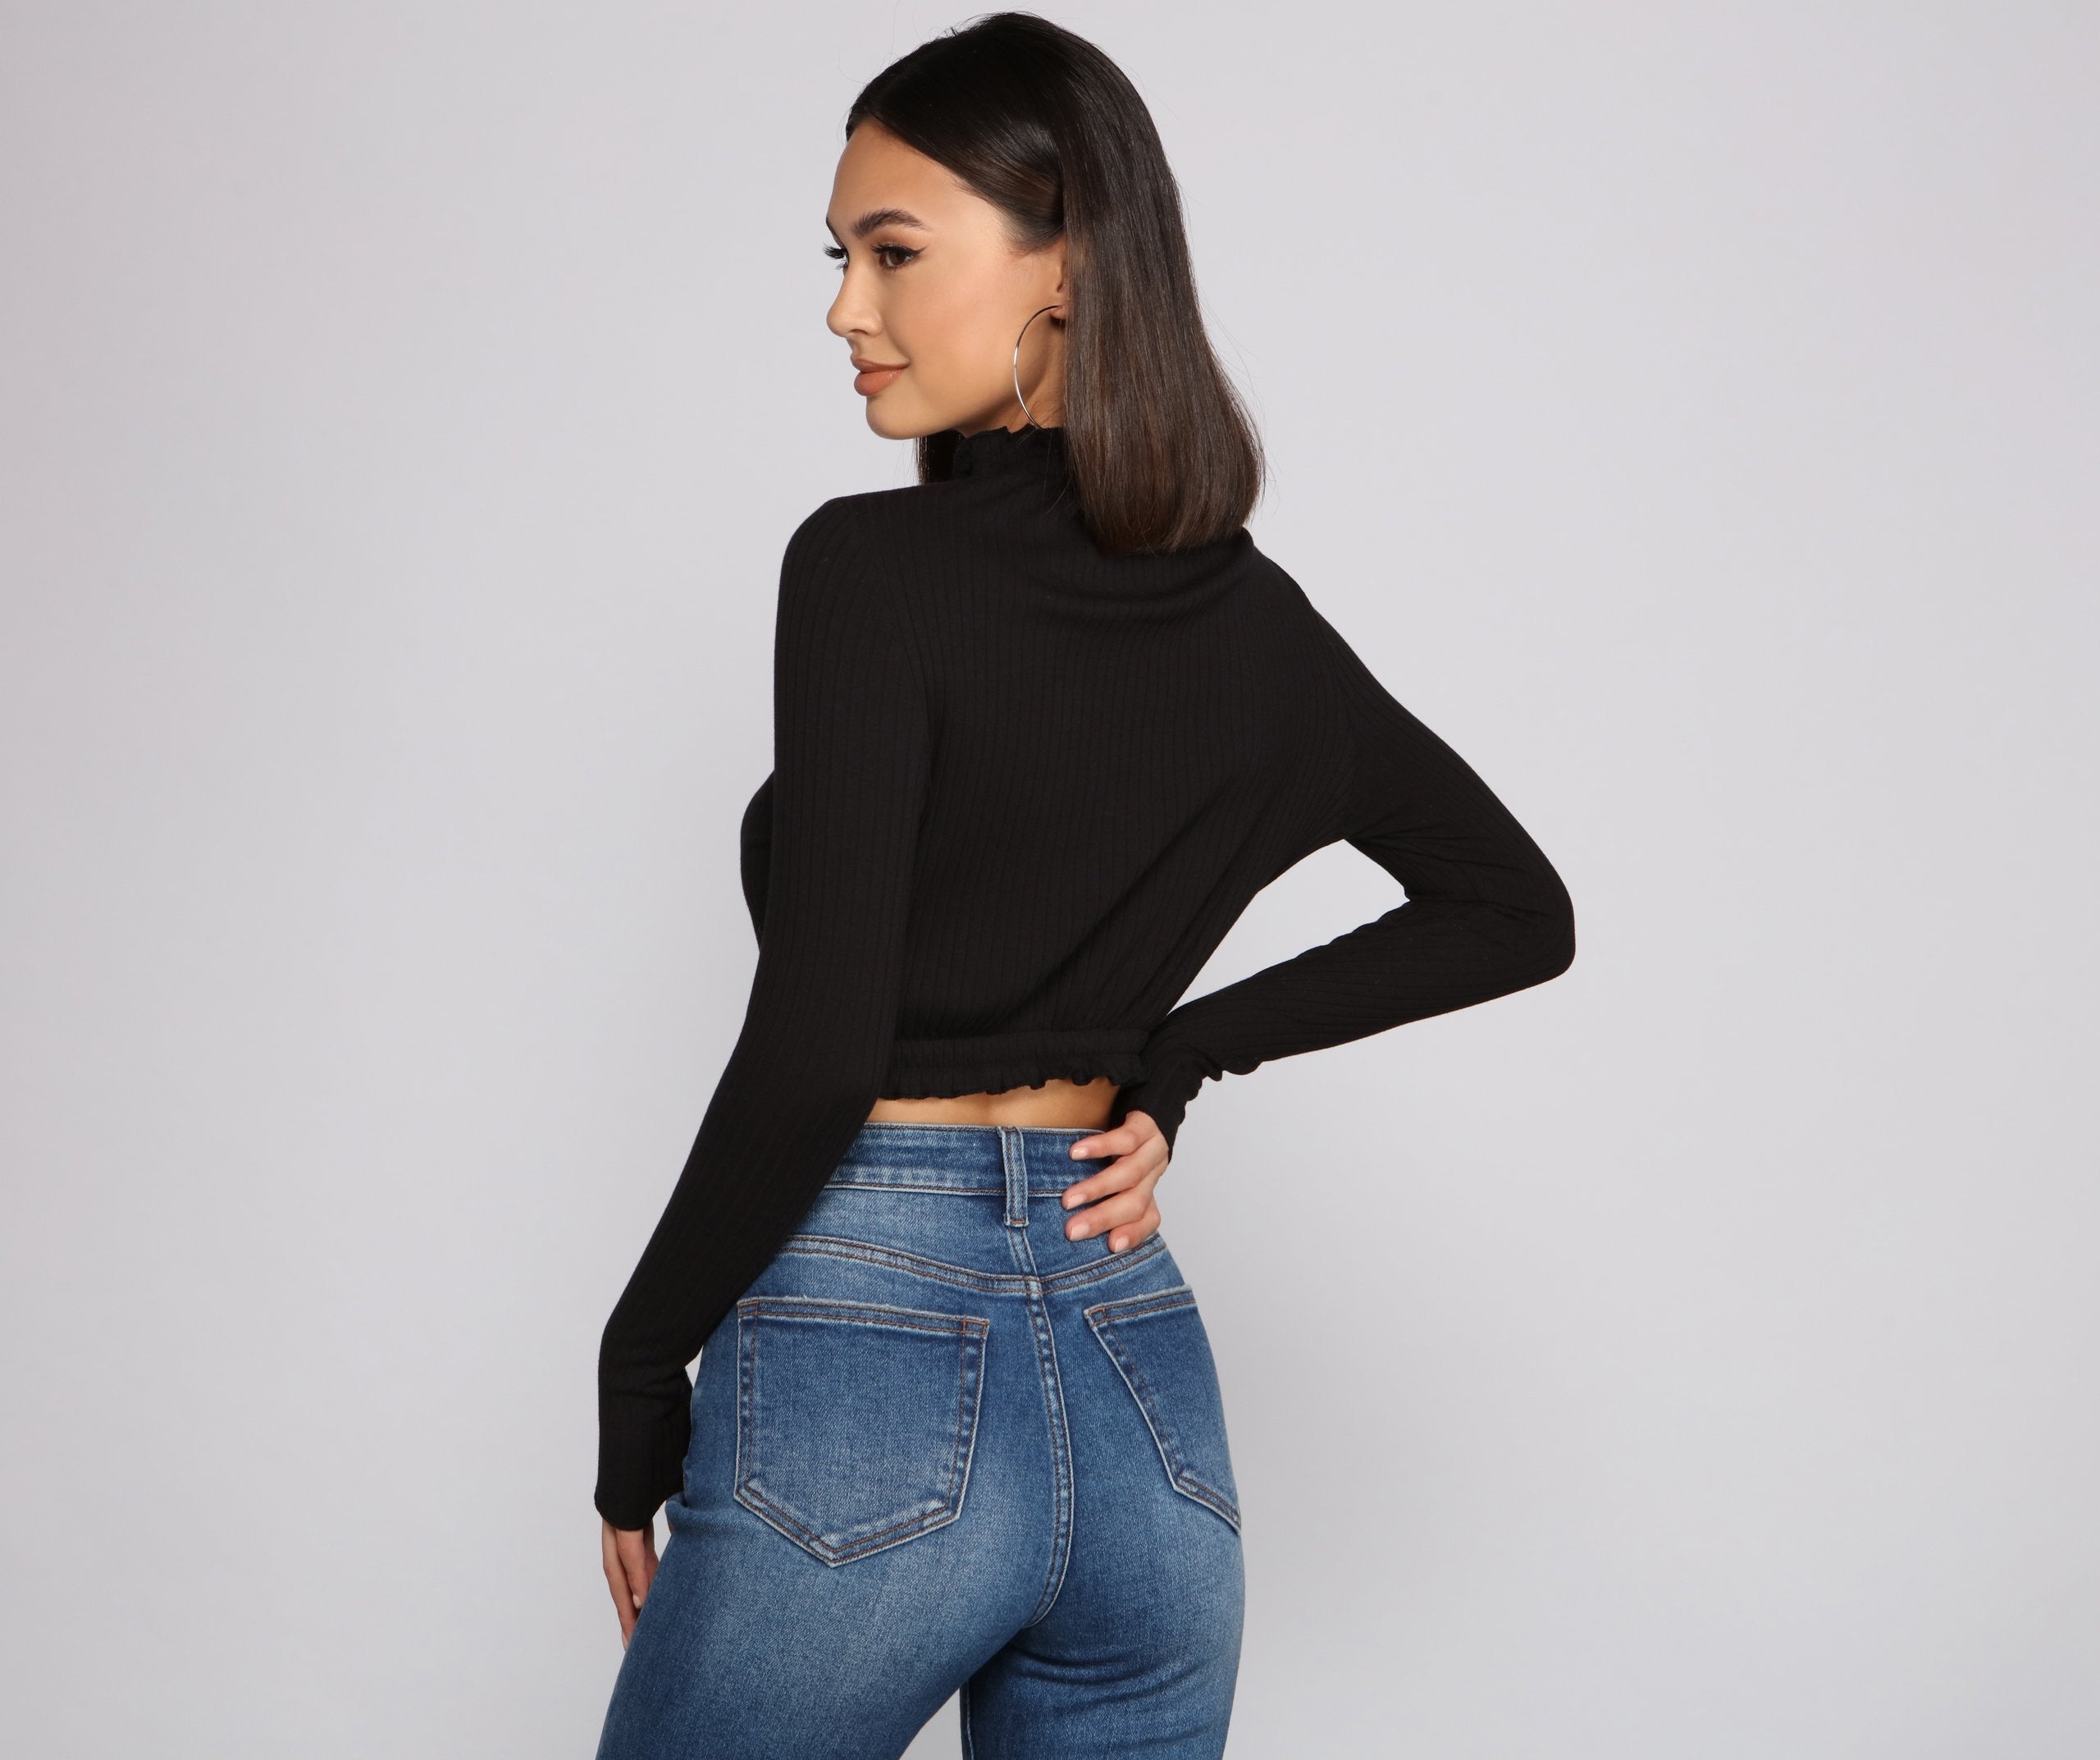 Stylish Babe Mock Neck Crop Top - Lady Occasions